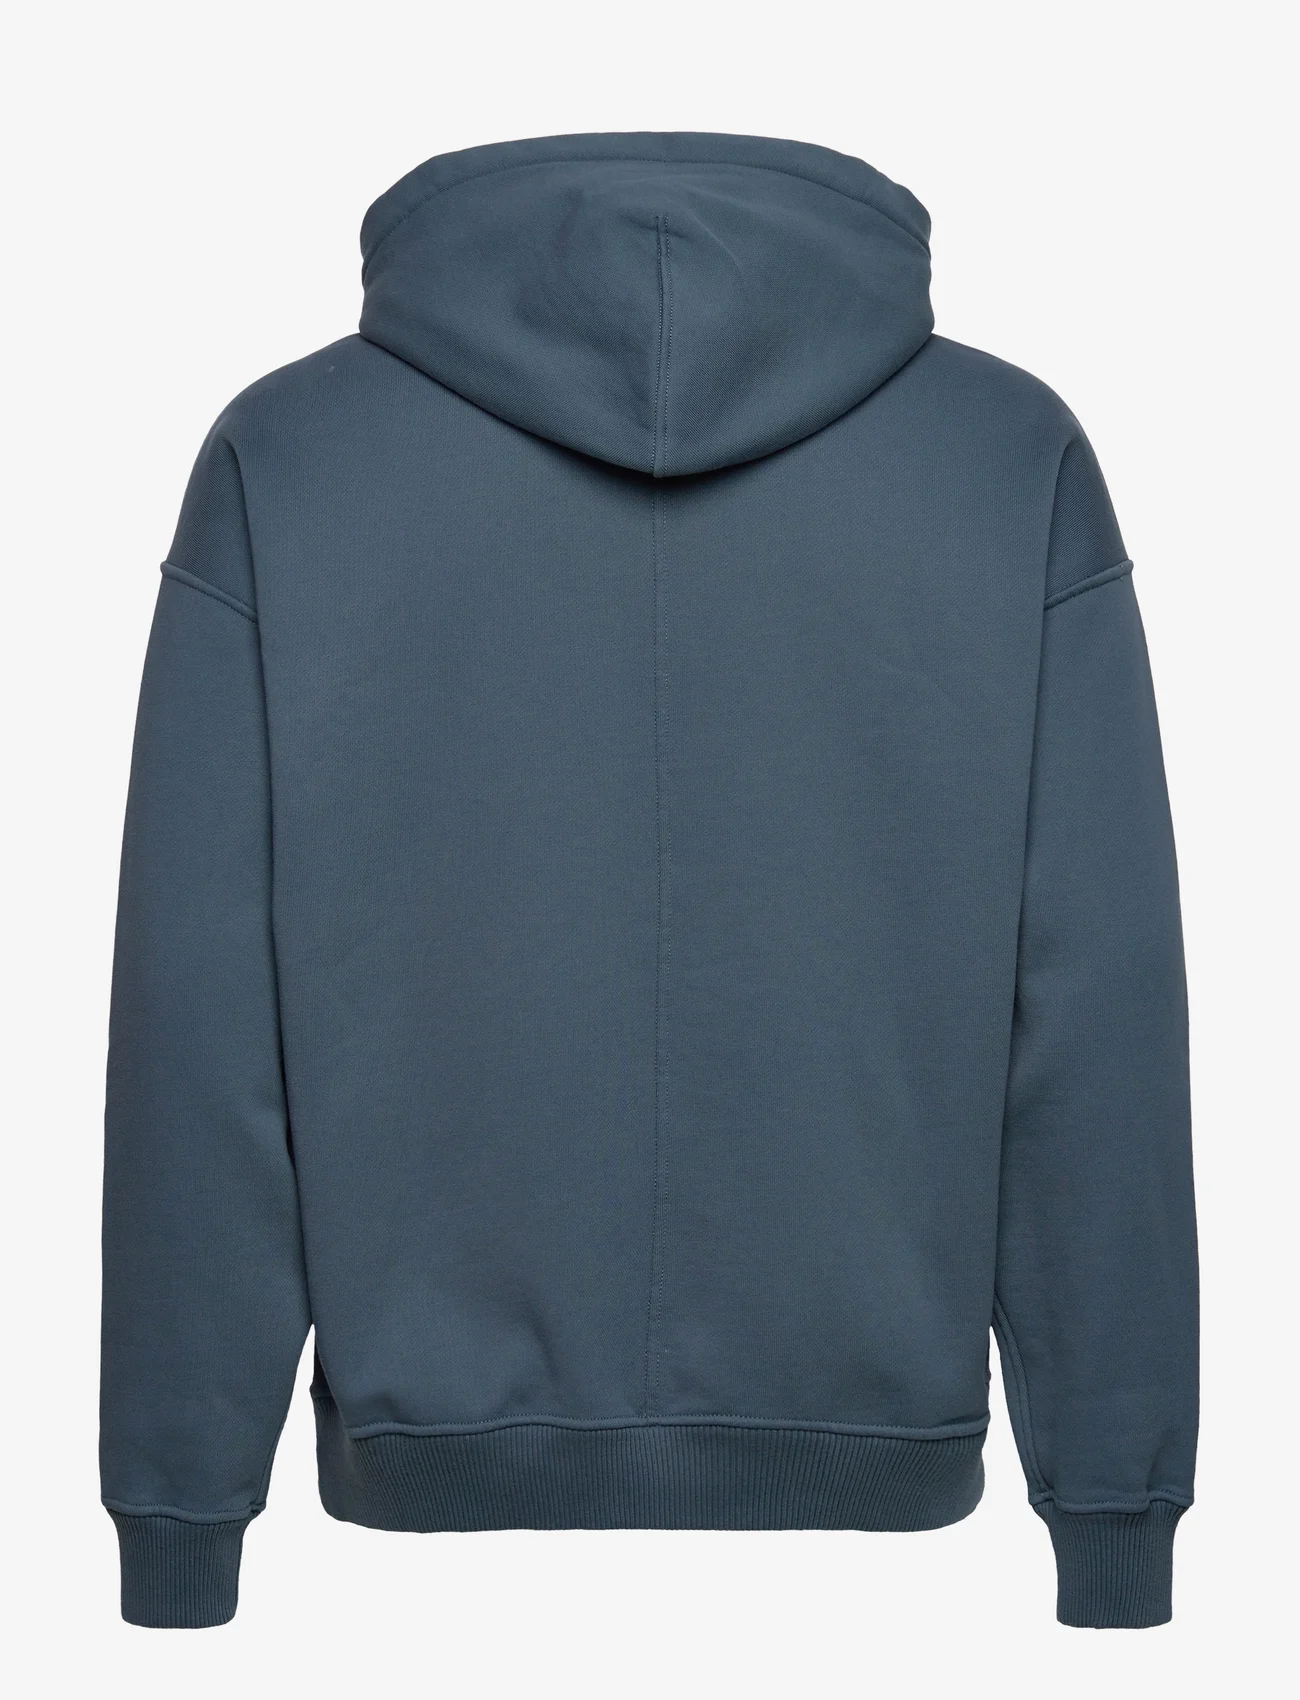 Abercrombie & Fitch - ANF MENS SWEATSHIRTS - hoodies - teal - 1